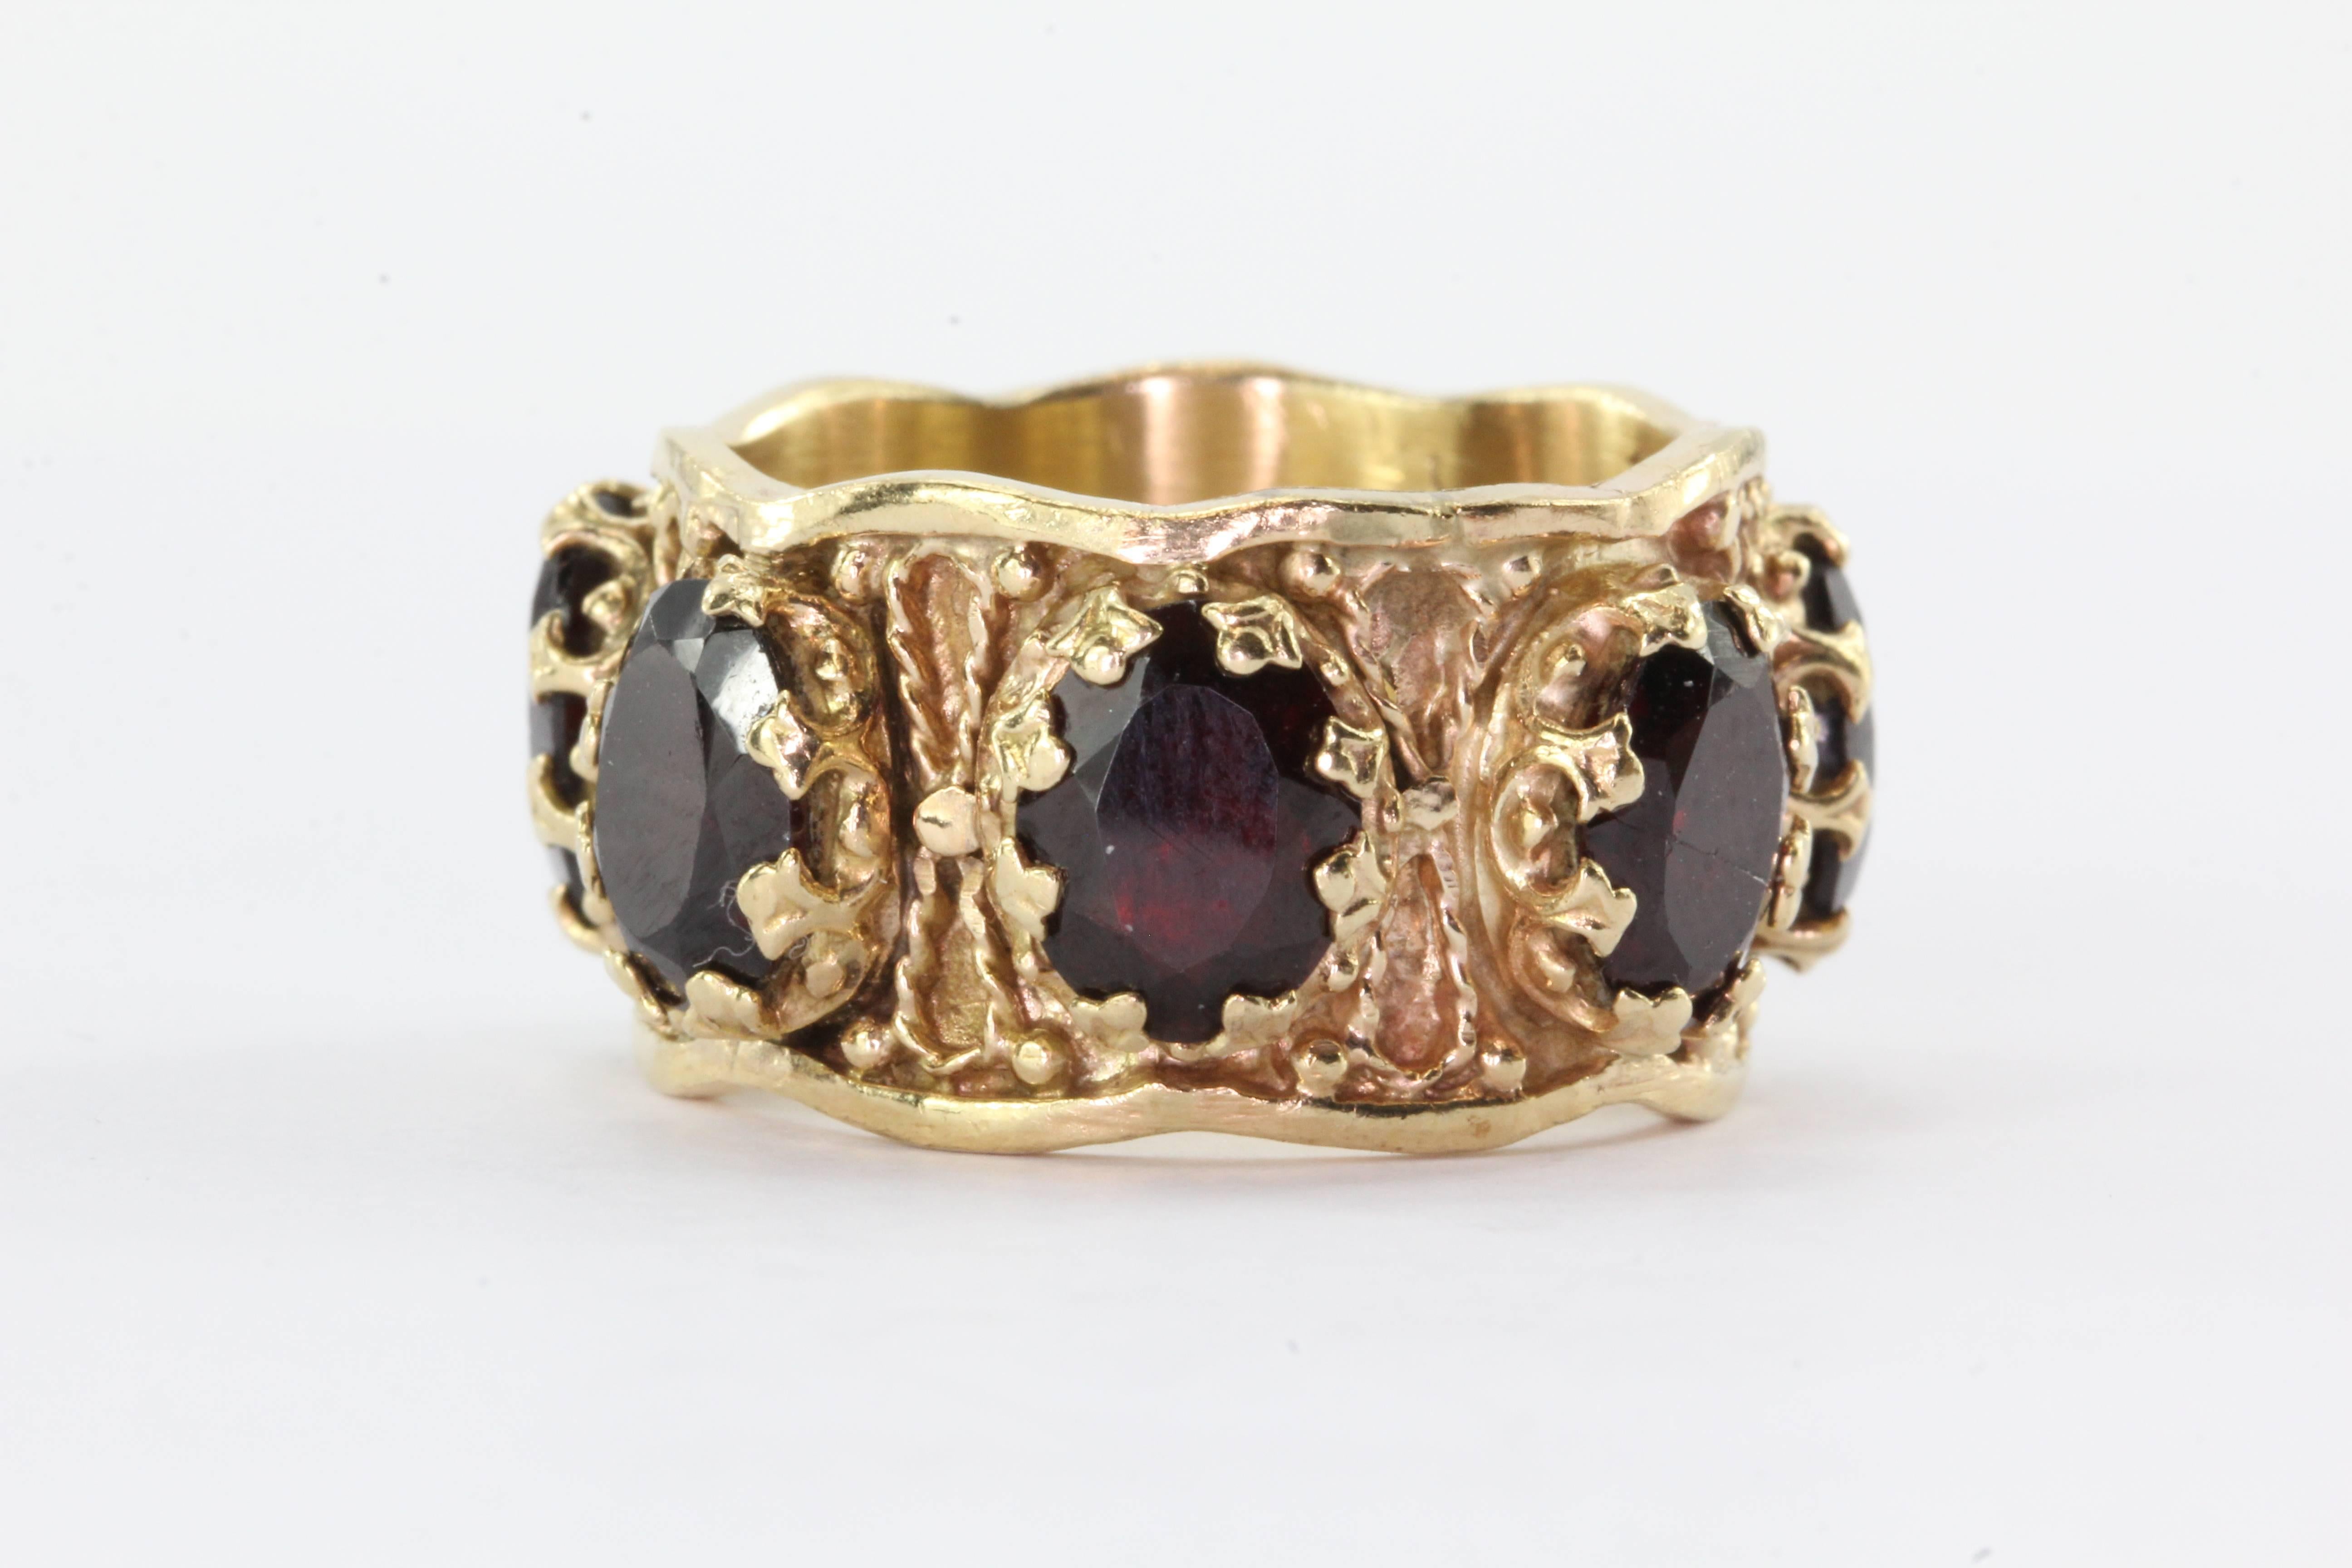 Gothic Revival Chunky 14K Gold Garnet Eternity Band Ring. The ring is in great estate condition, ready to wear, one of the garnets is cracked. It is set with seven oval cut garnets that come to 5.5 carats total. They wrap completely around the ring.